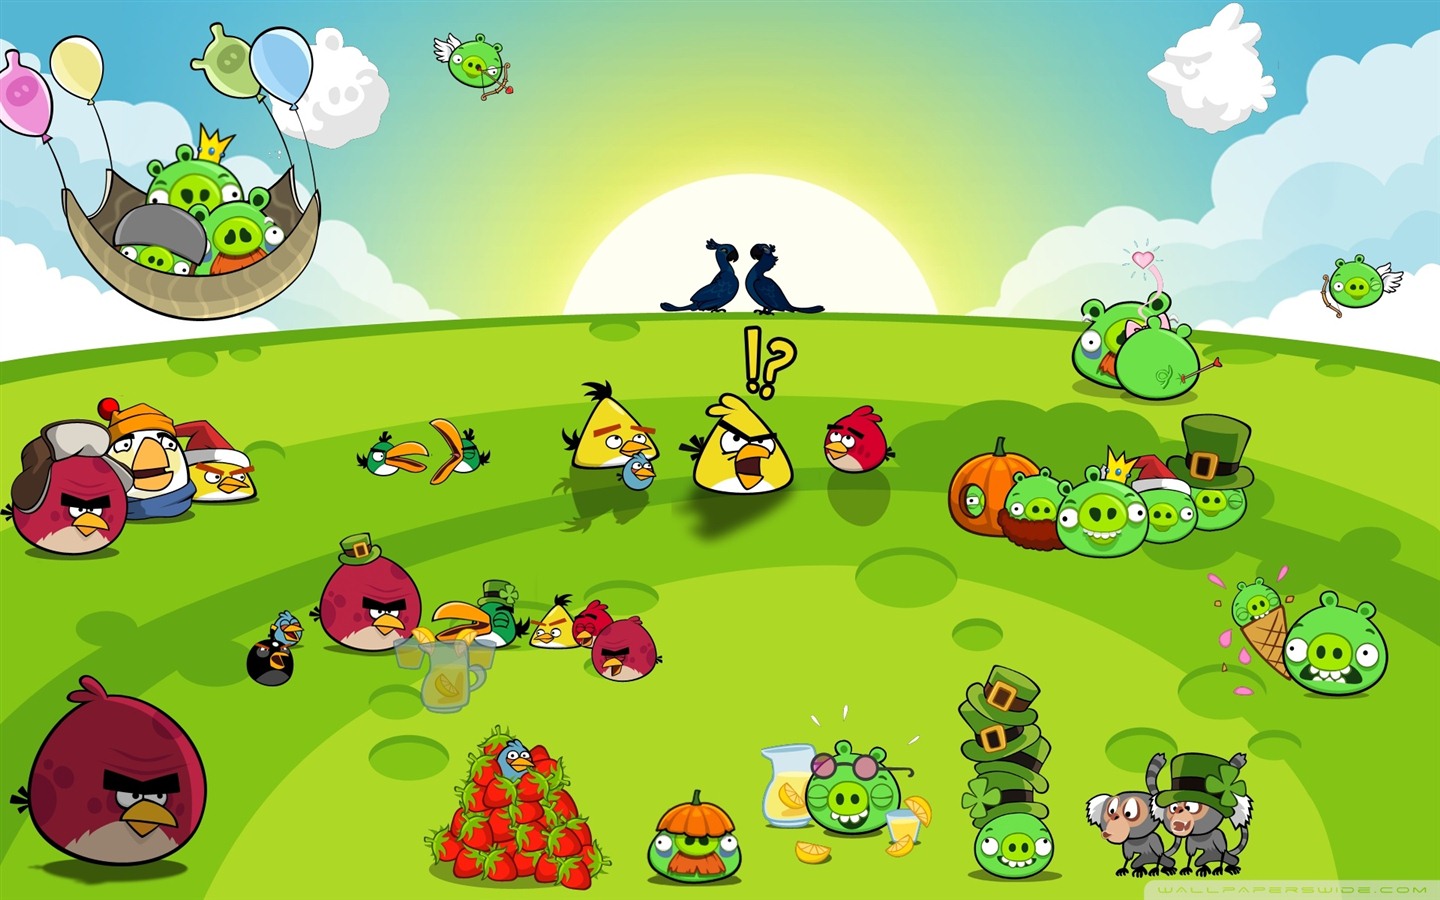 Angry Birds Spiel wallpapers #11 - 1440x900